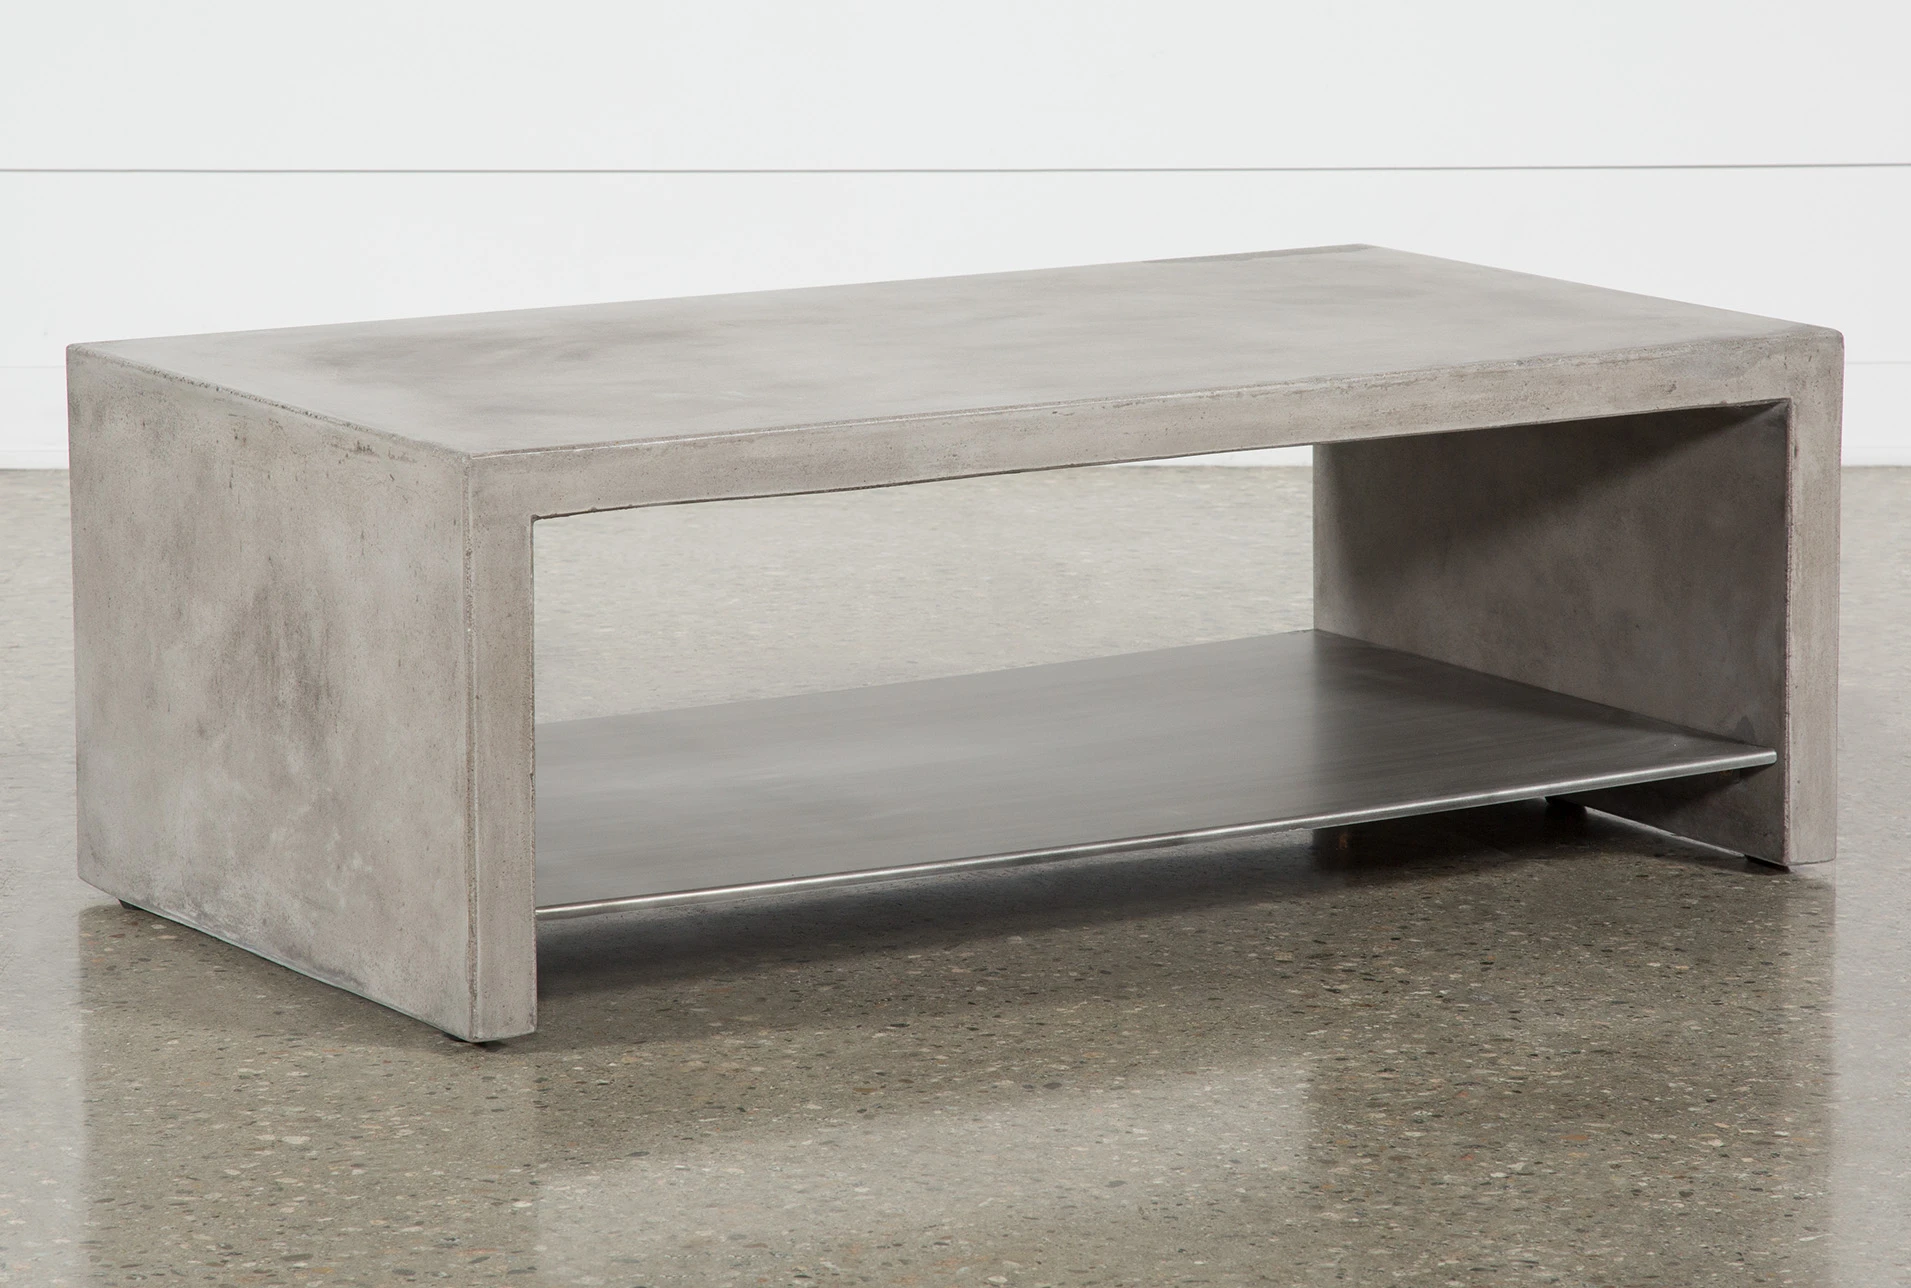 concrete coffee table - Interior Design Ideas for Your Modern Home